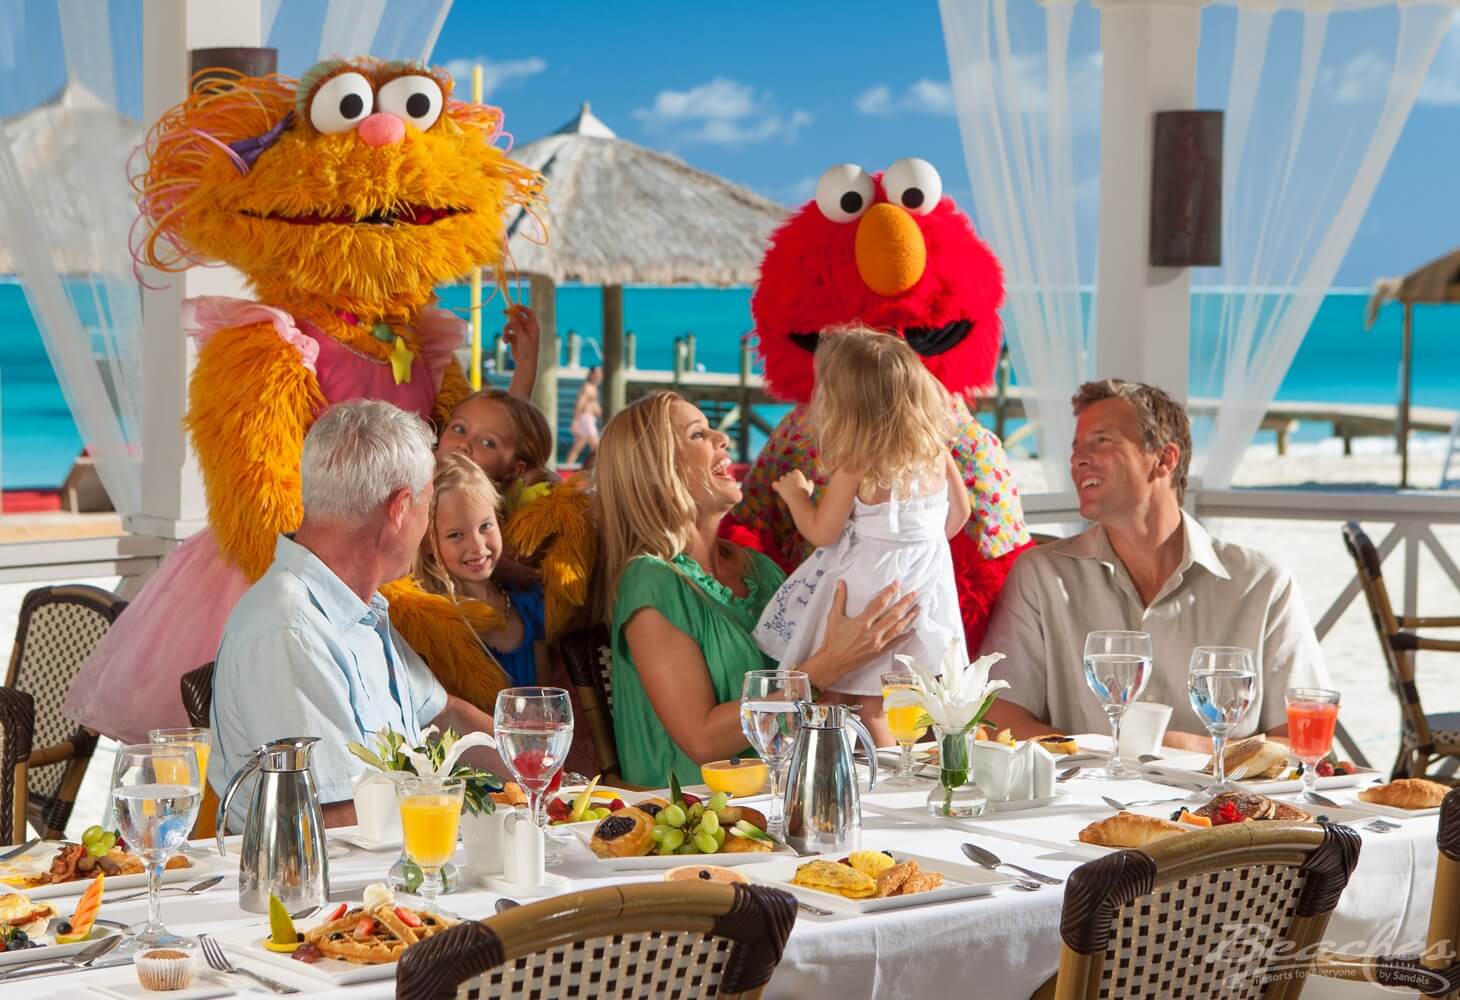 Breakfast with Sesame Street on the beach in the Turks and Caicos Islands